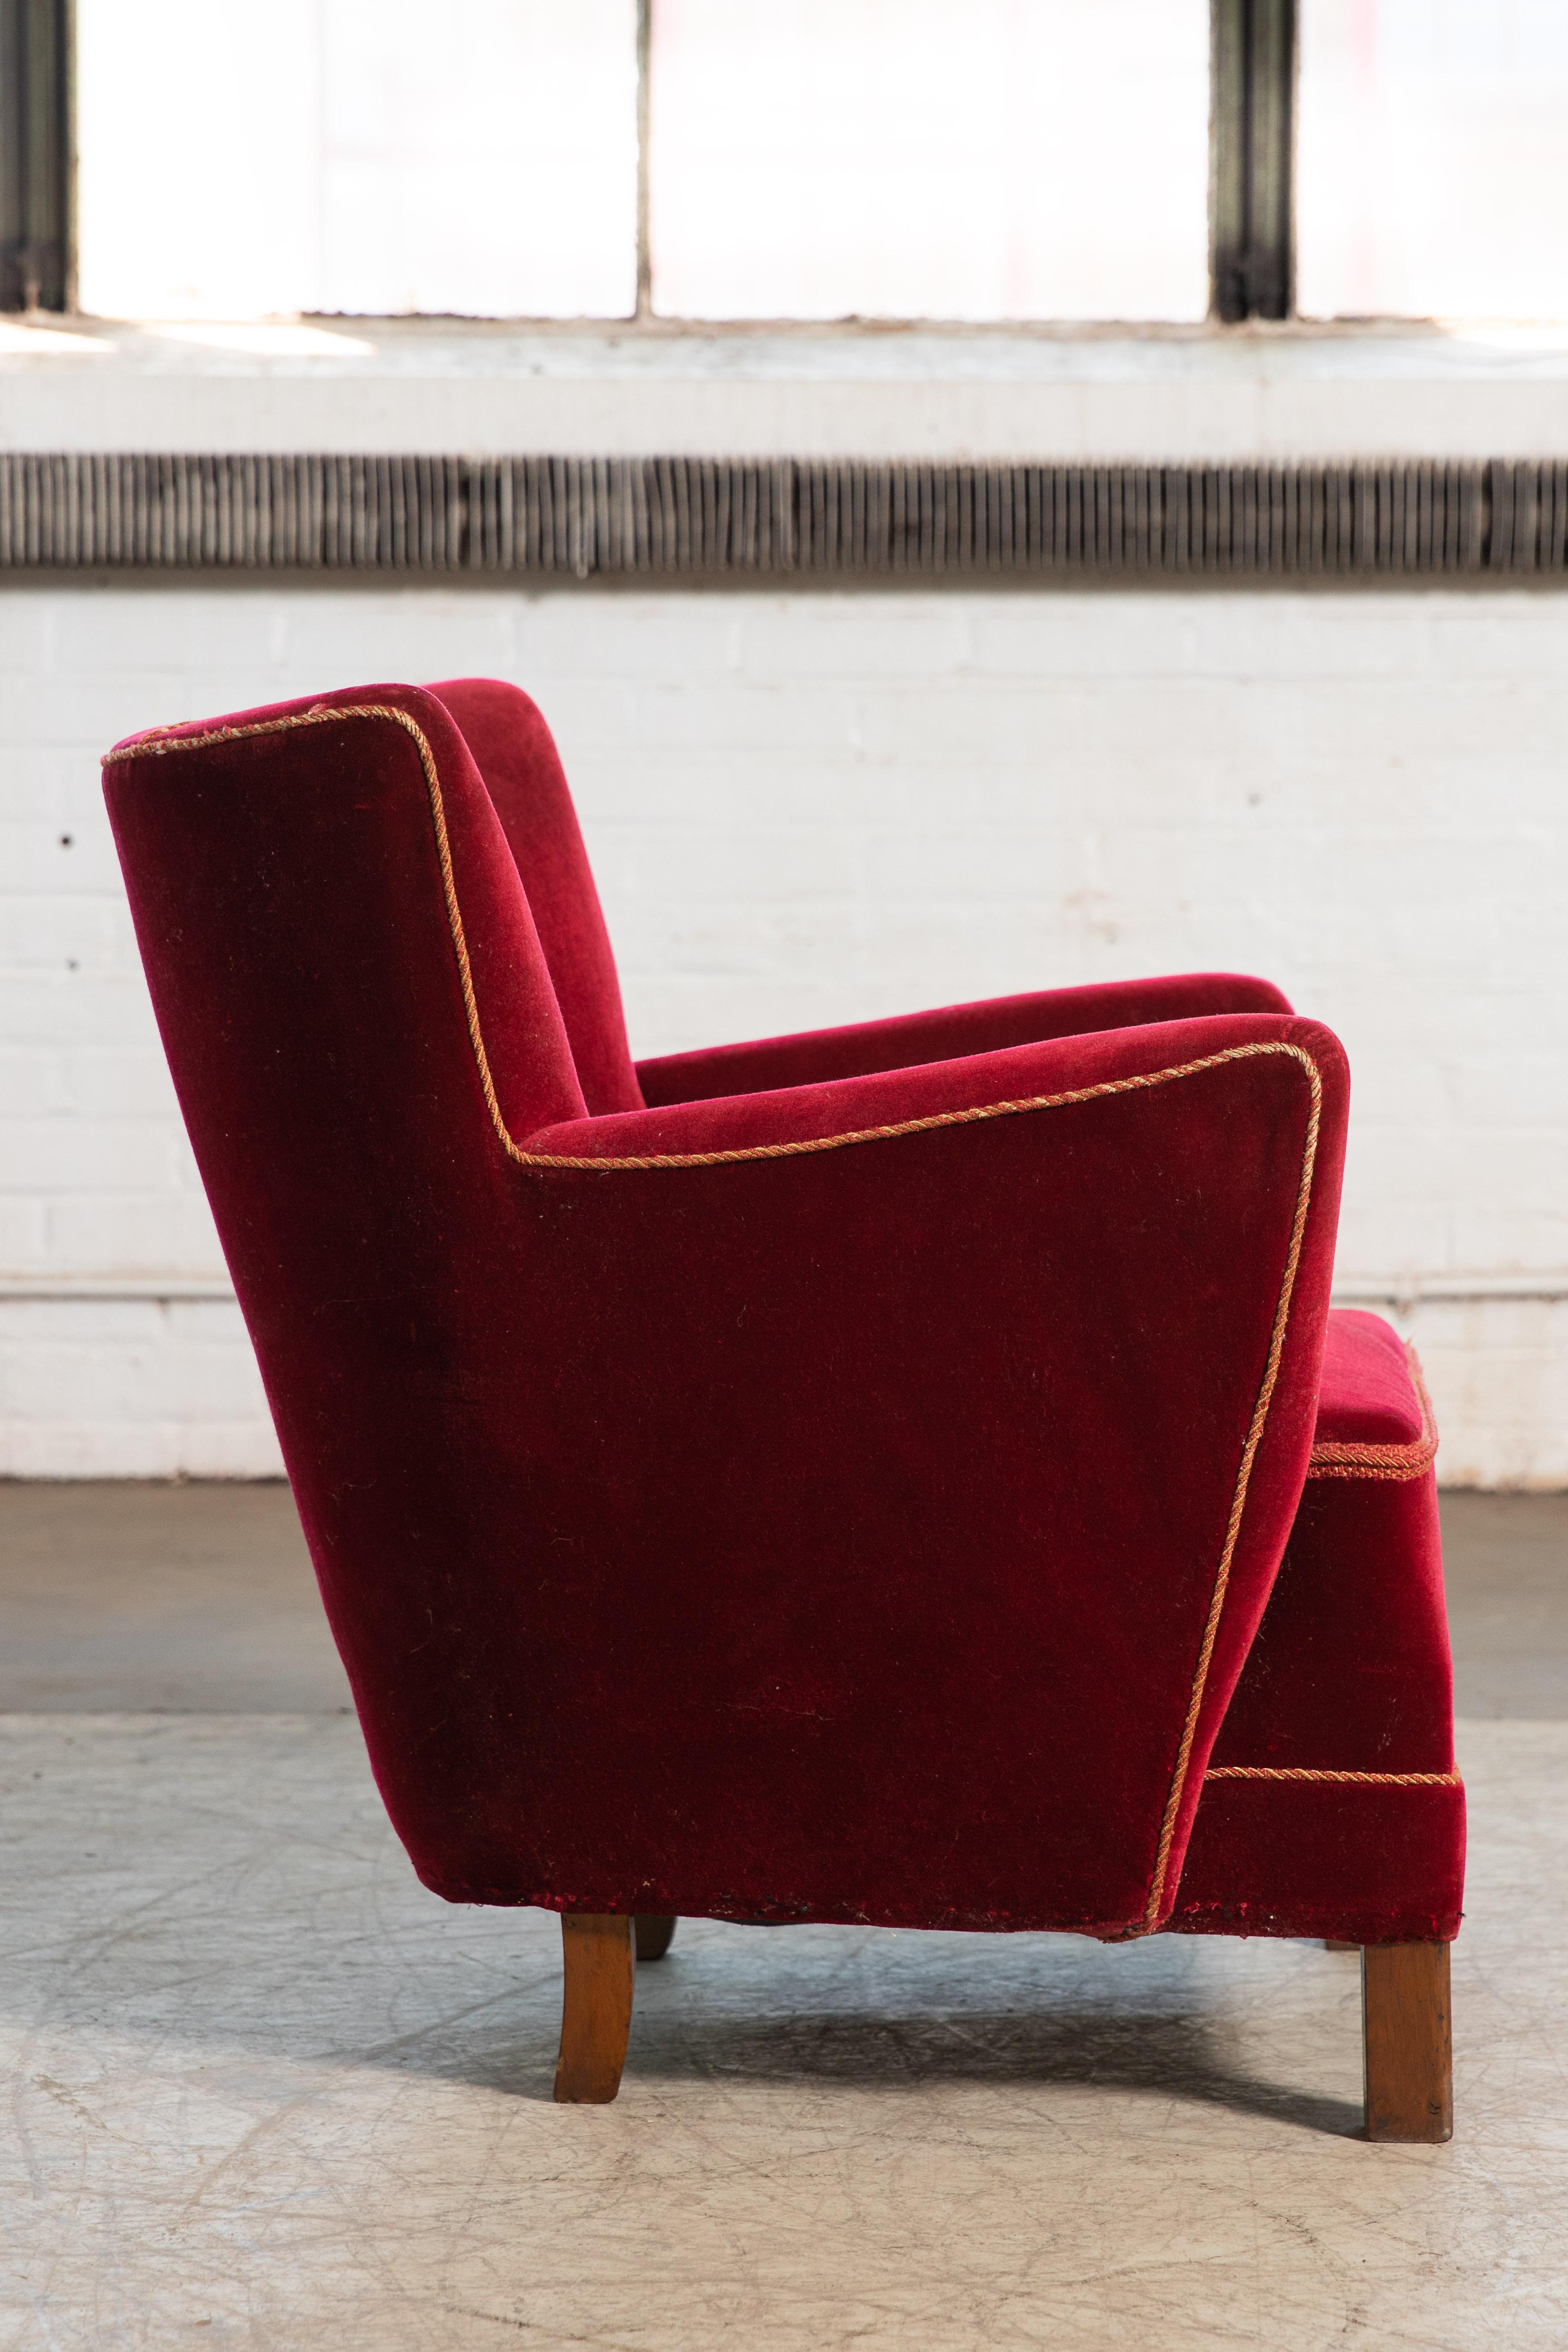 Mid-20th Century Danish Midcentury 1940s Low Lounge Chair in Red Mohair